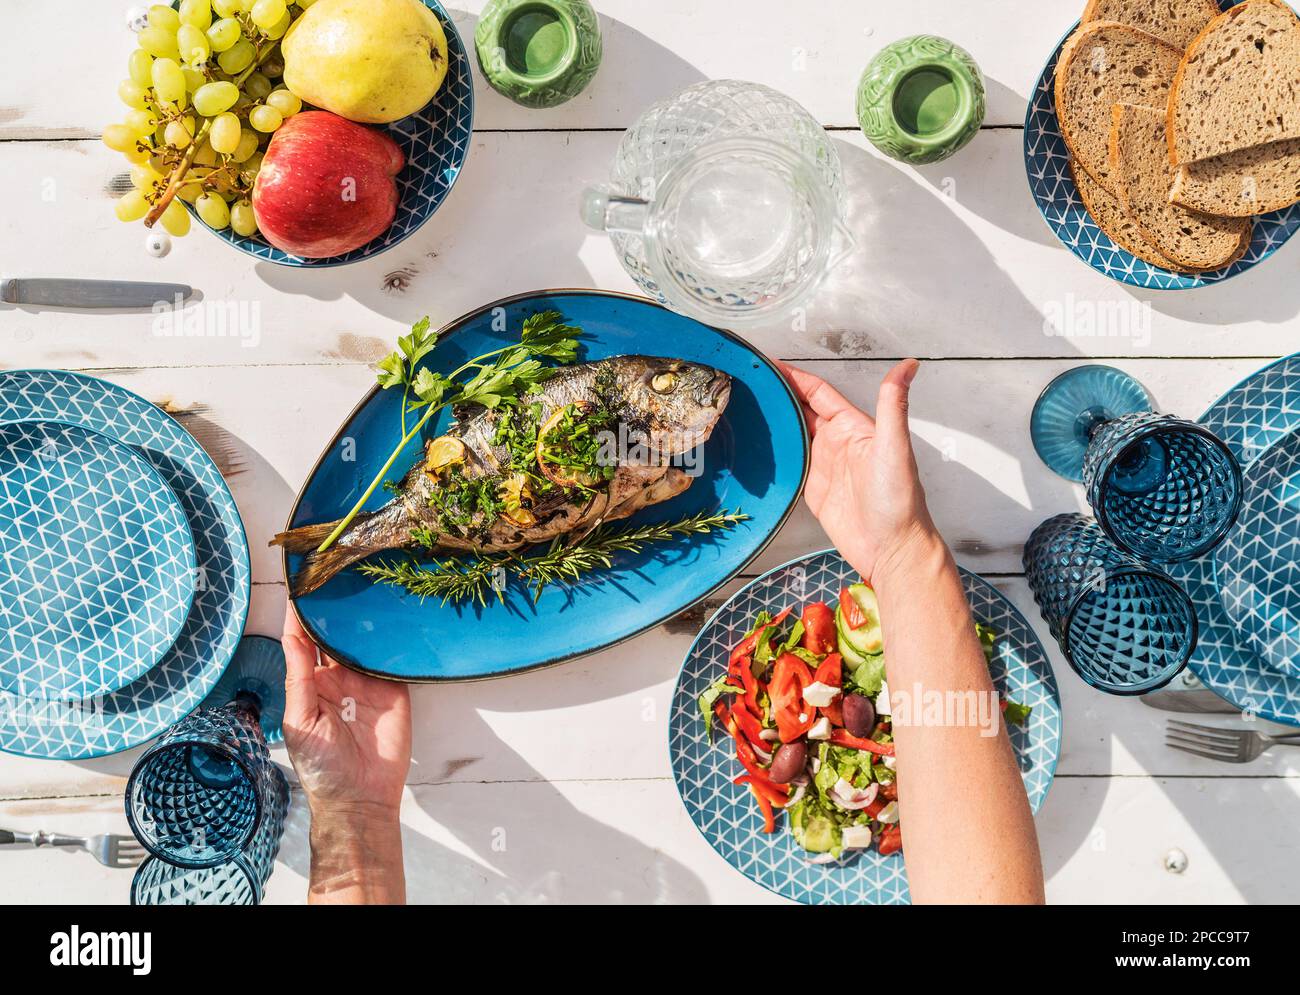 Gilt-head bream also known as Orata grilled on a barbeque grill served by a woman on a white wooden table with vegetable salad and fruits. Healthy sea Stock Photo